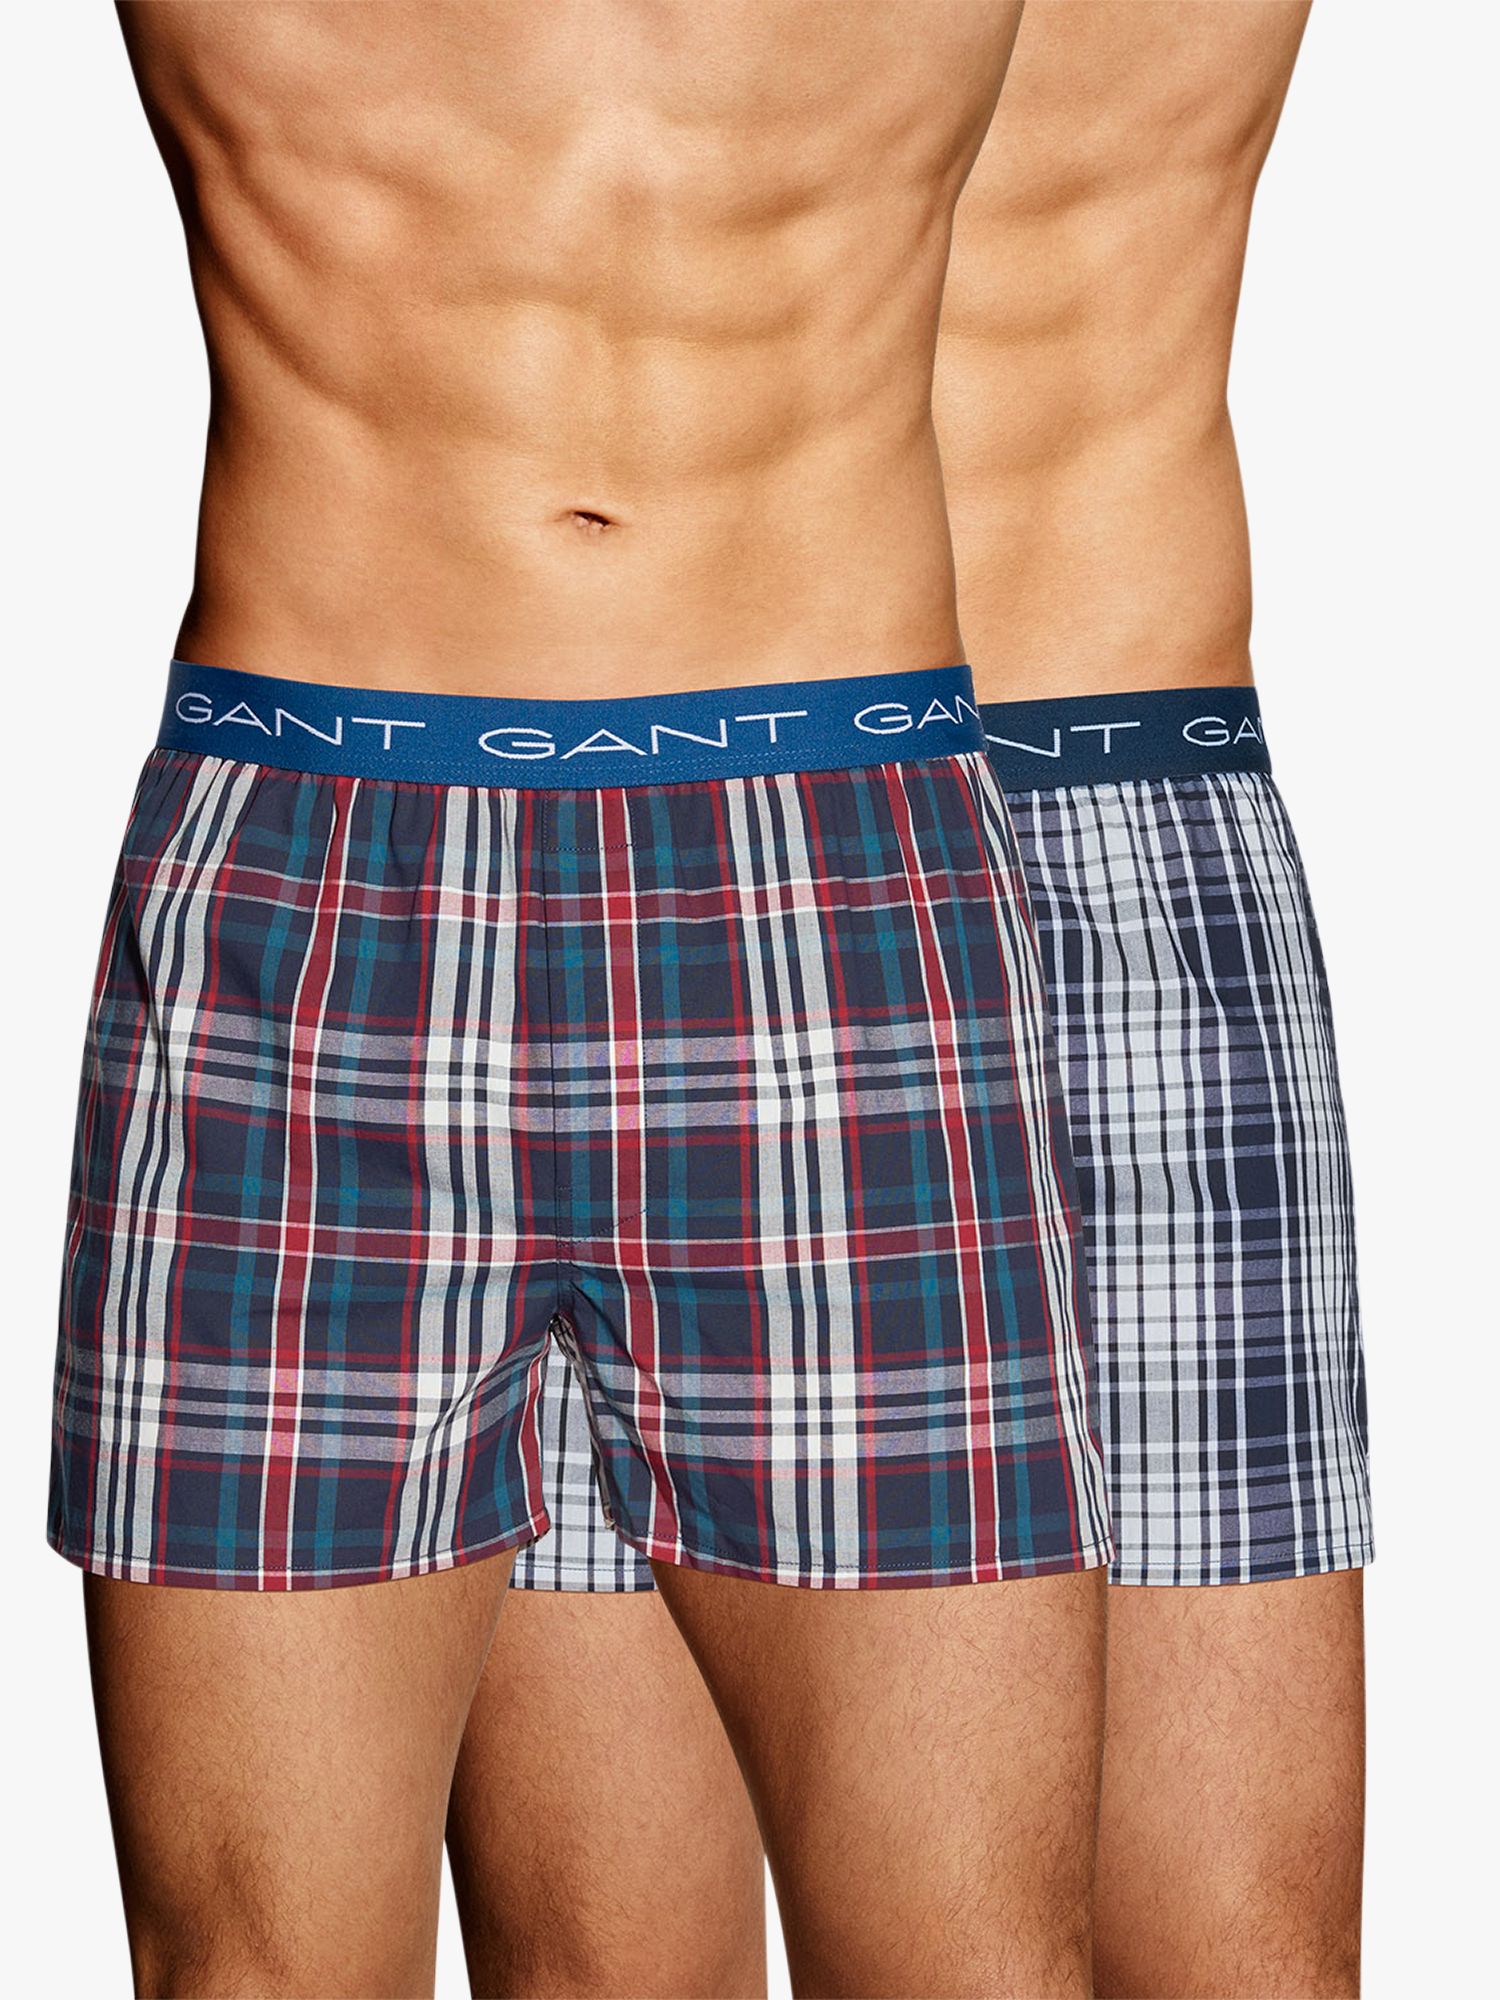 GANT Woven Cotton Check Boxers, Pack of 2, Blue/Navy